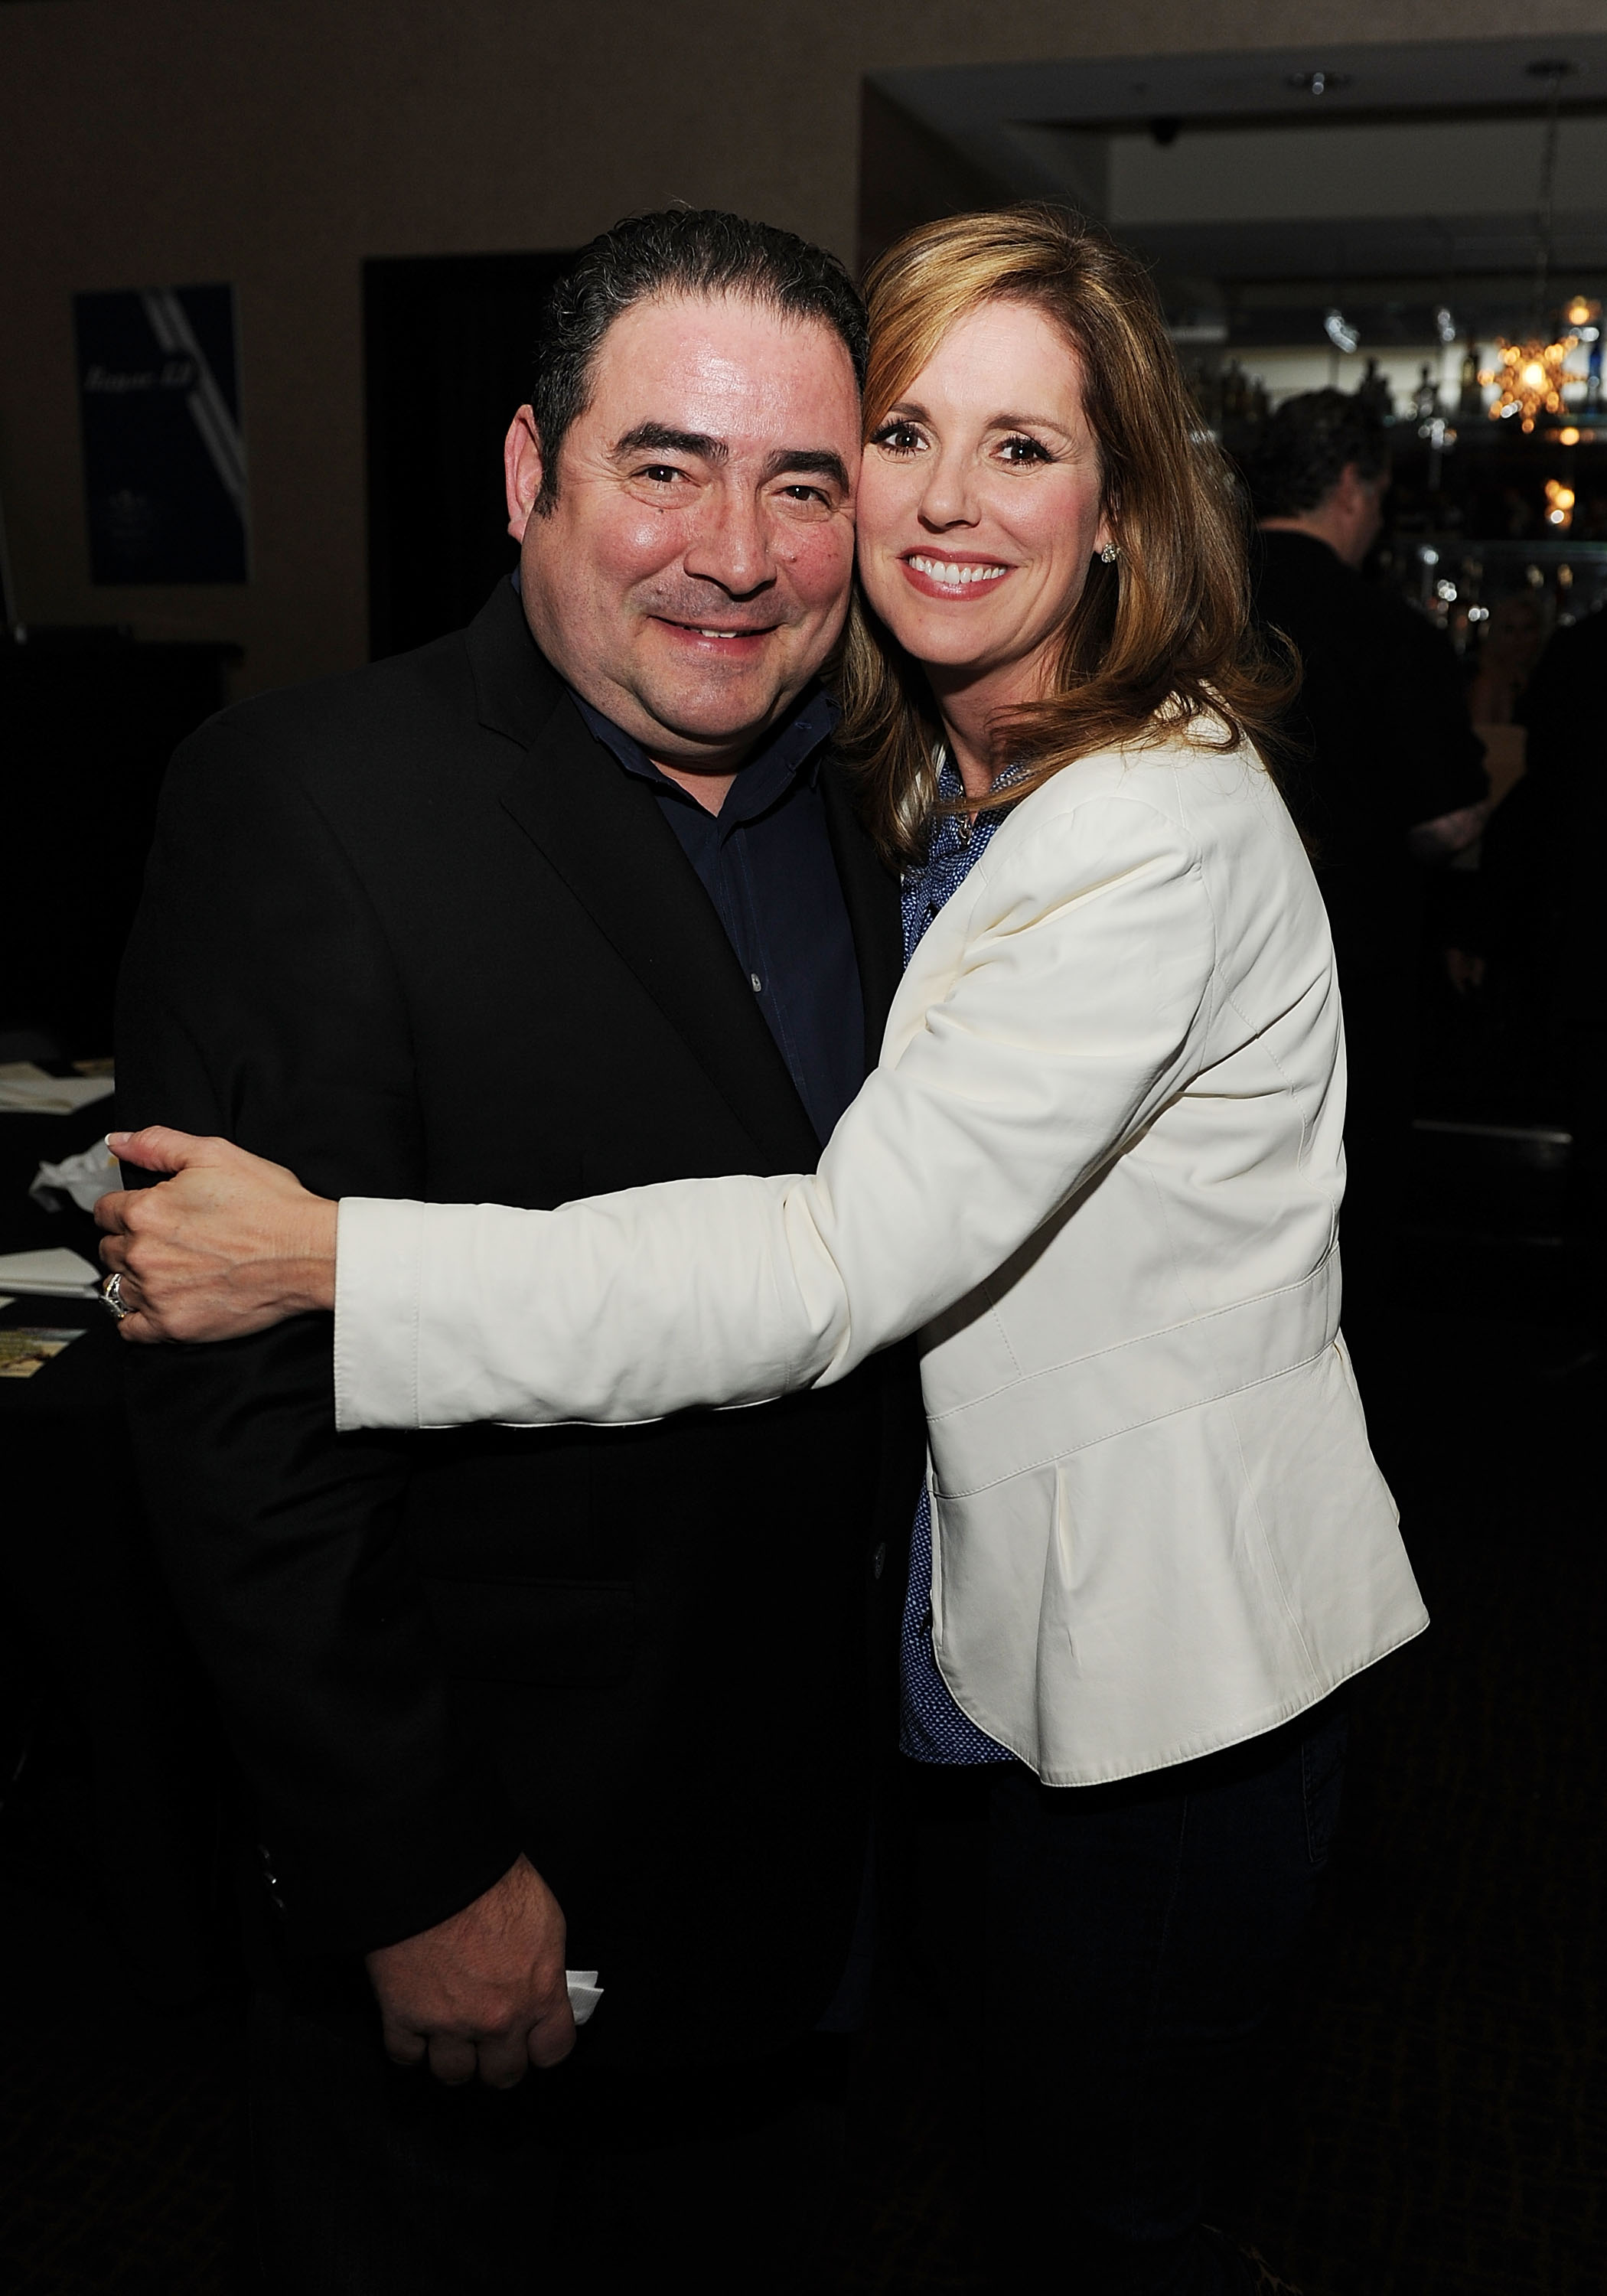 Emeril Lagasse and Alden Lovelace at the Beach Bar Rum launch on February 17, 2012, in Las Vegas, Nevada. | Source: Getty Images